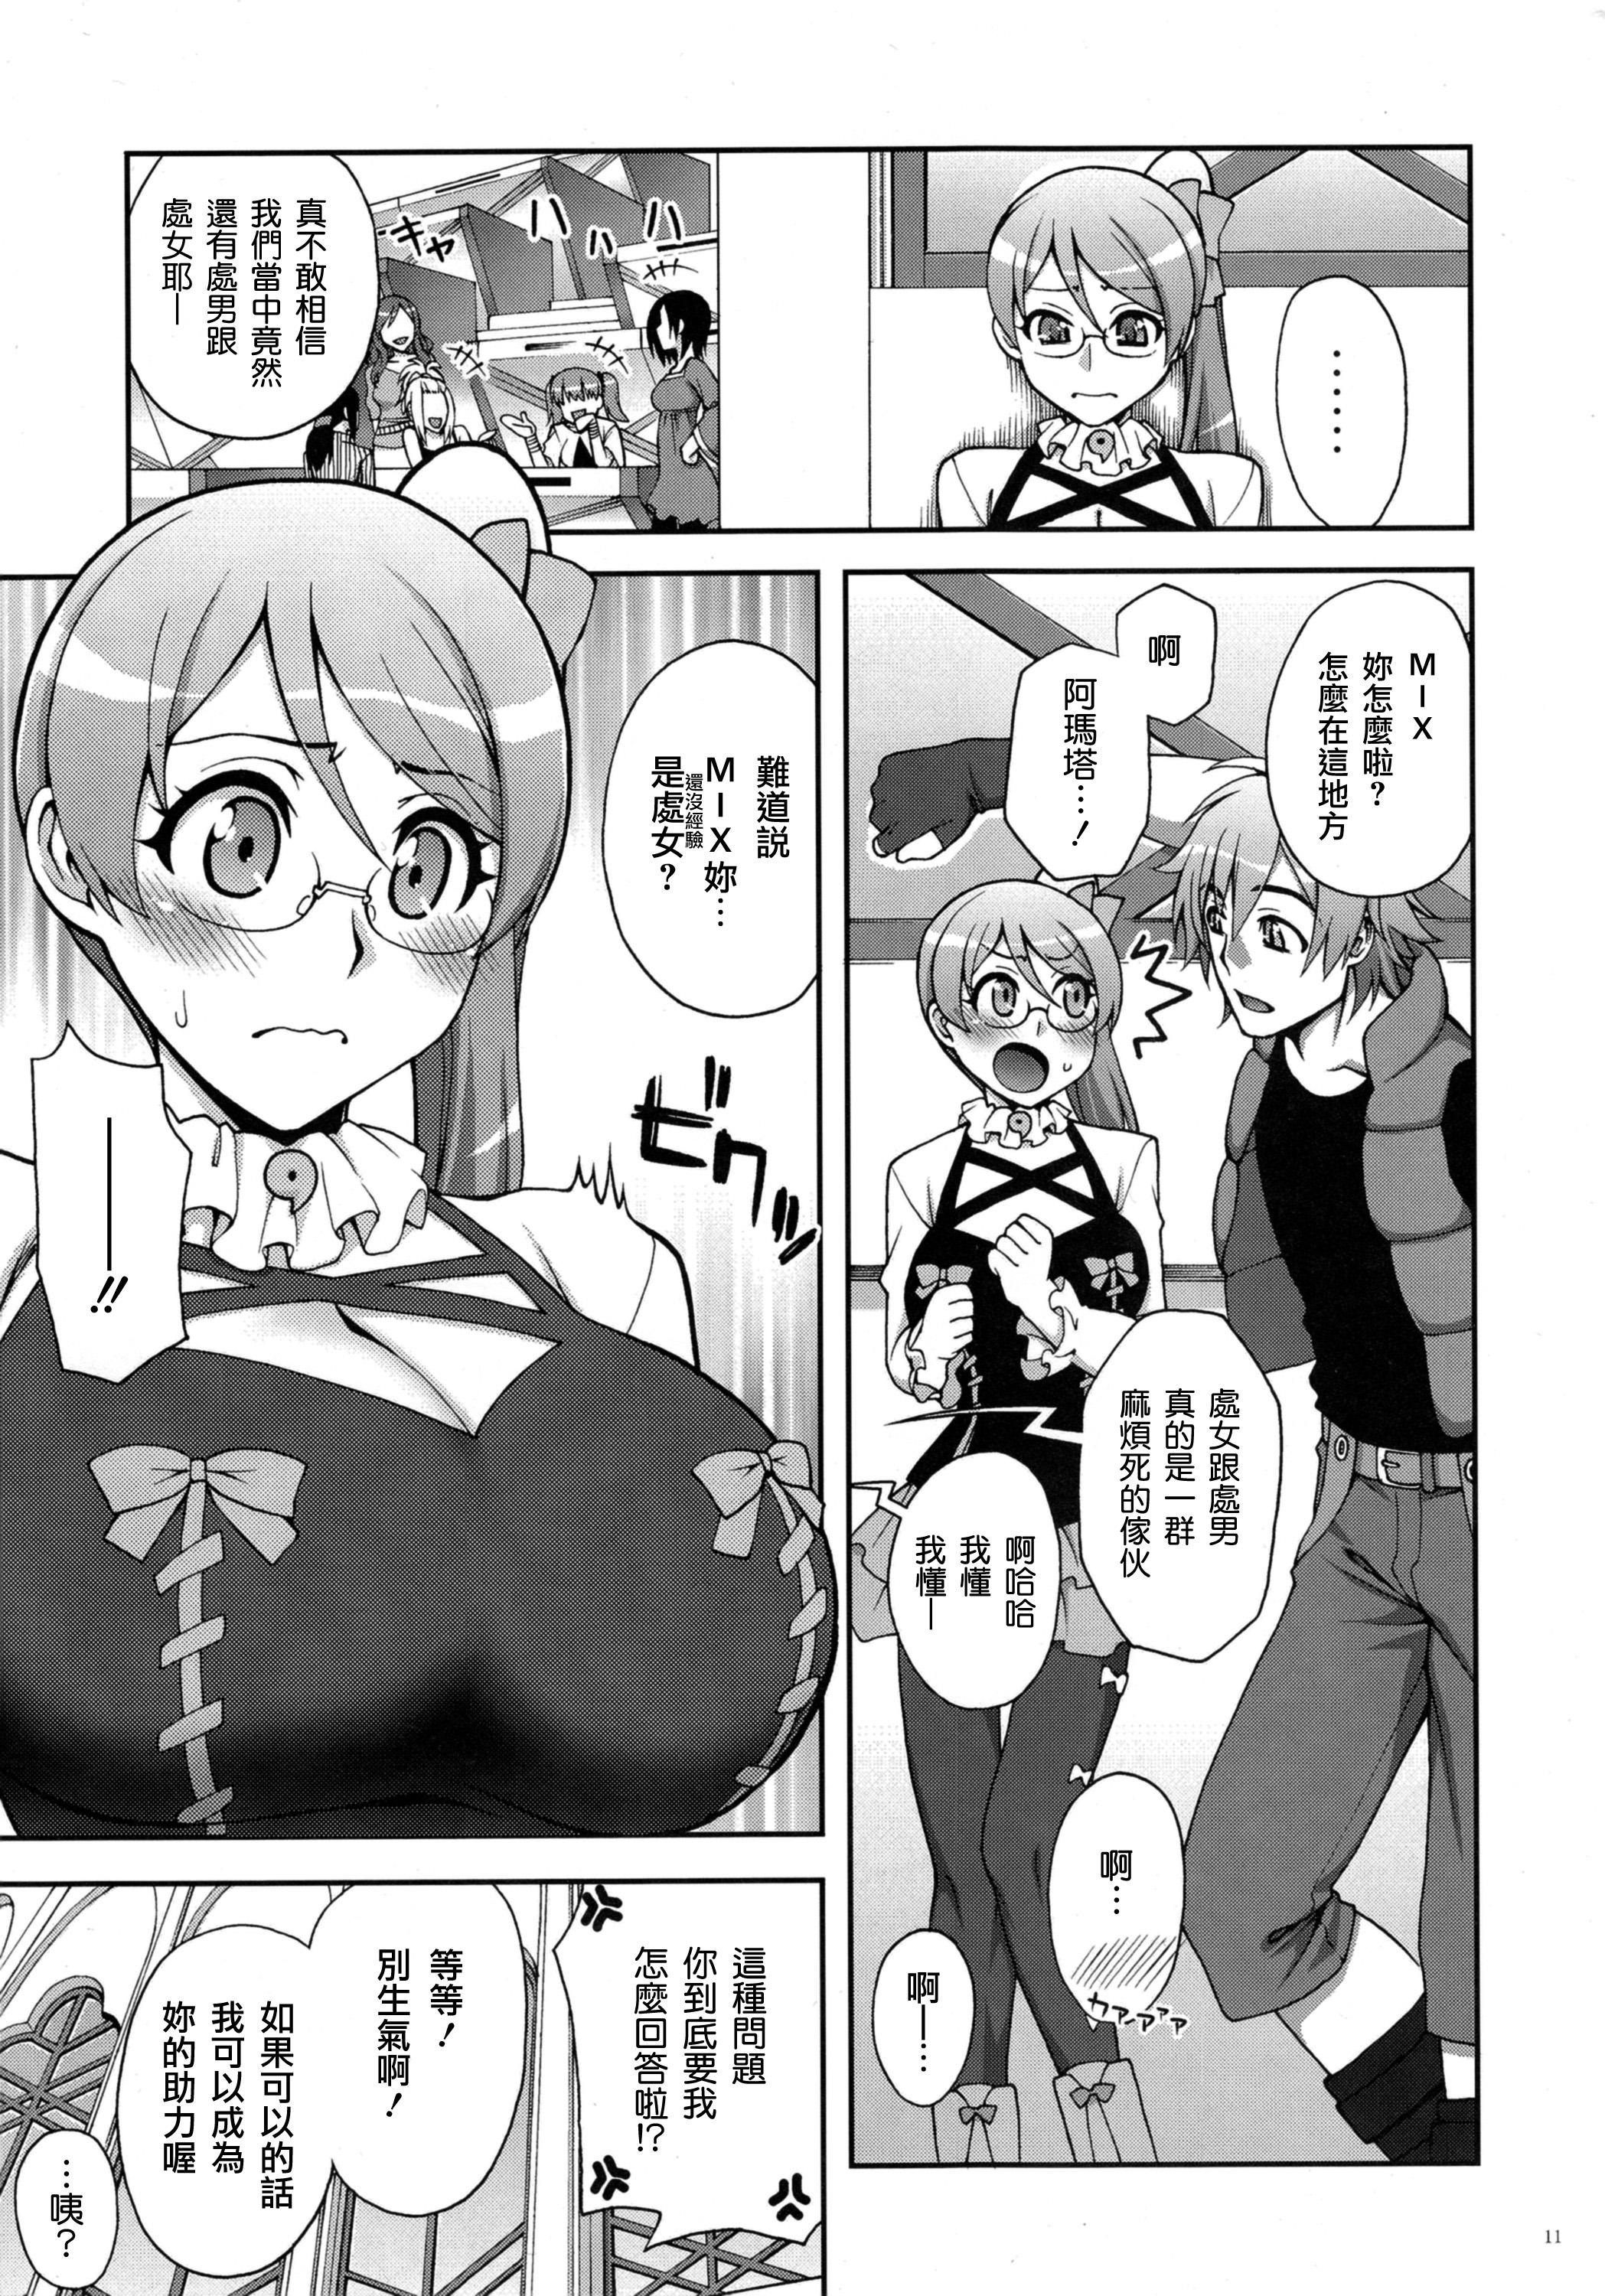 Satin For The First Time - Aquarion evol Selfie - Page 10